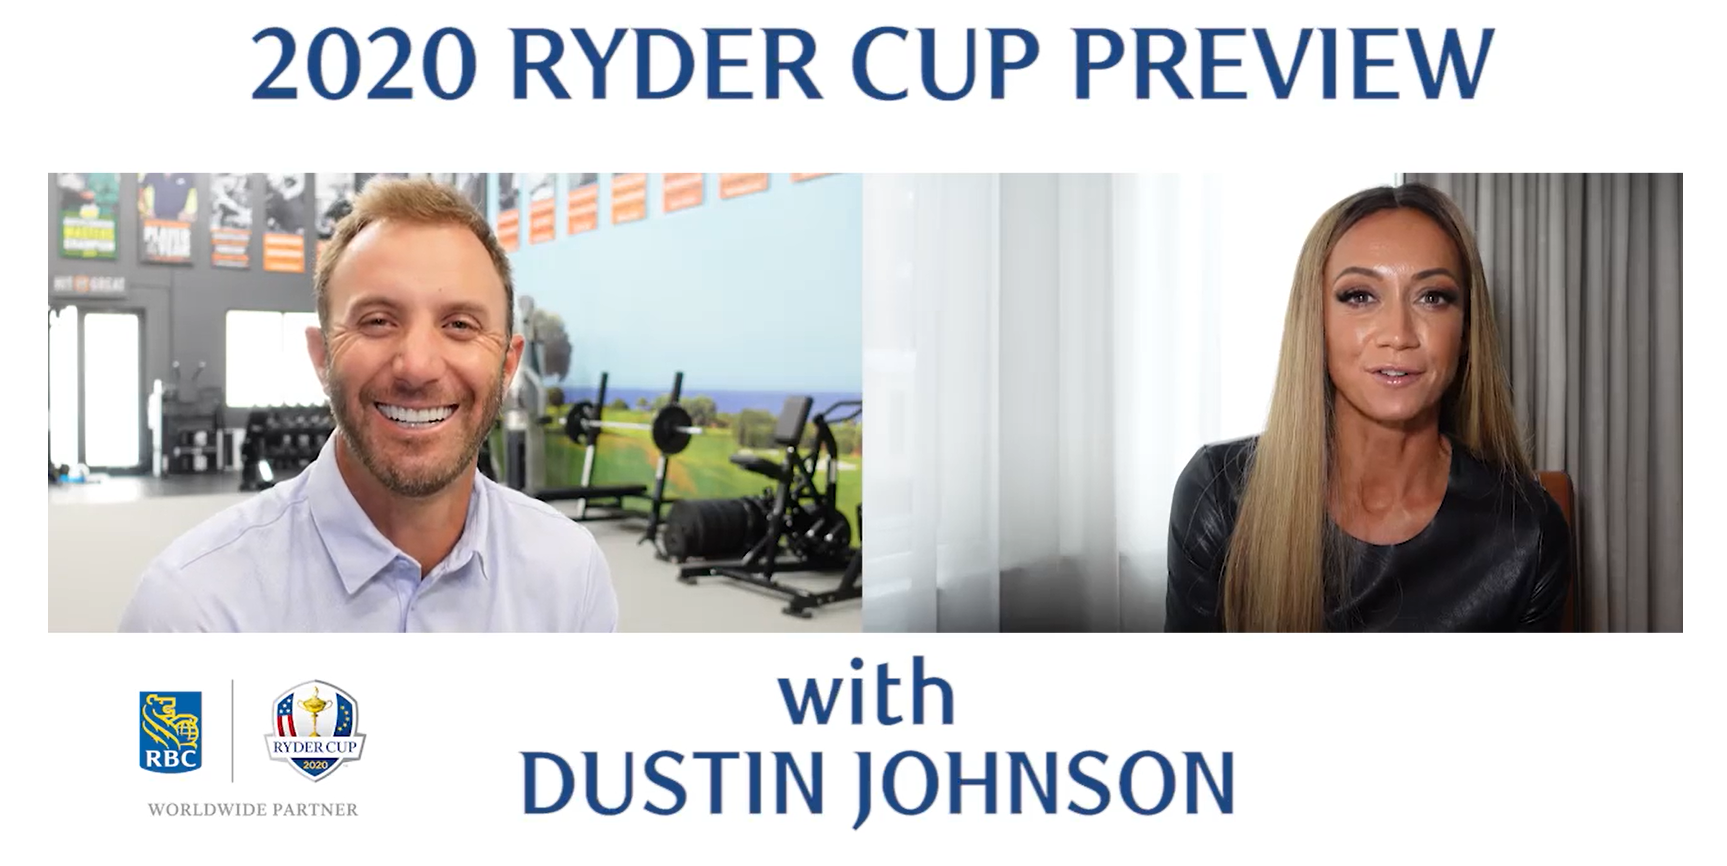 Dustin Johnson share his views on the 2020 Ryder Cup with TV broadcaster Kate Abdo